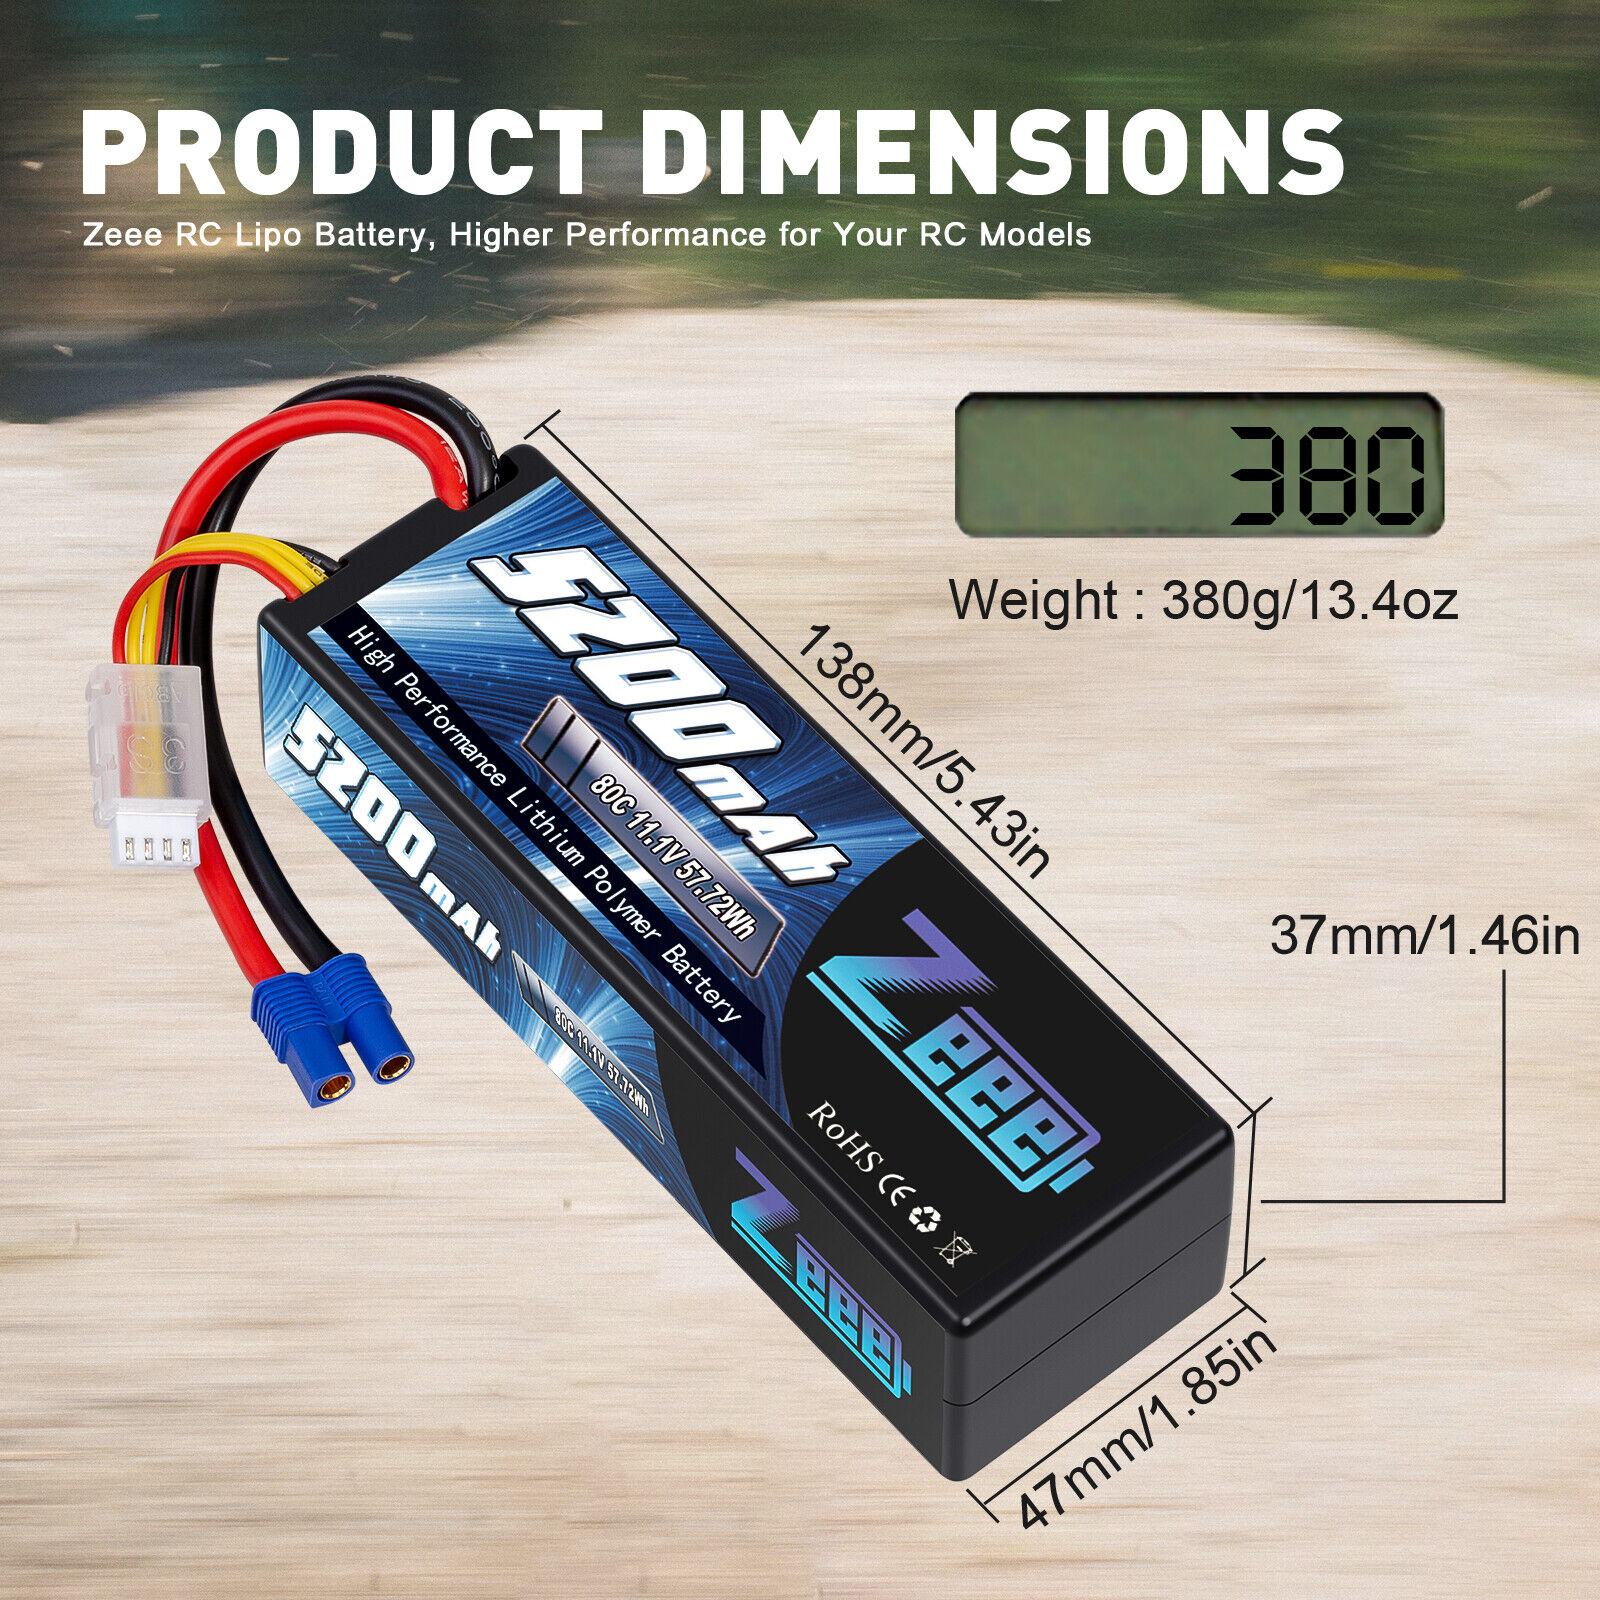 2x Zeee 11.1V 80C 5200mAh EC3 3S LiPo Battery for RC Car Truck Helicopter Buggy ZEEE Does Not Apply - фотография #4